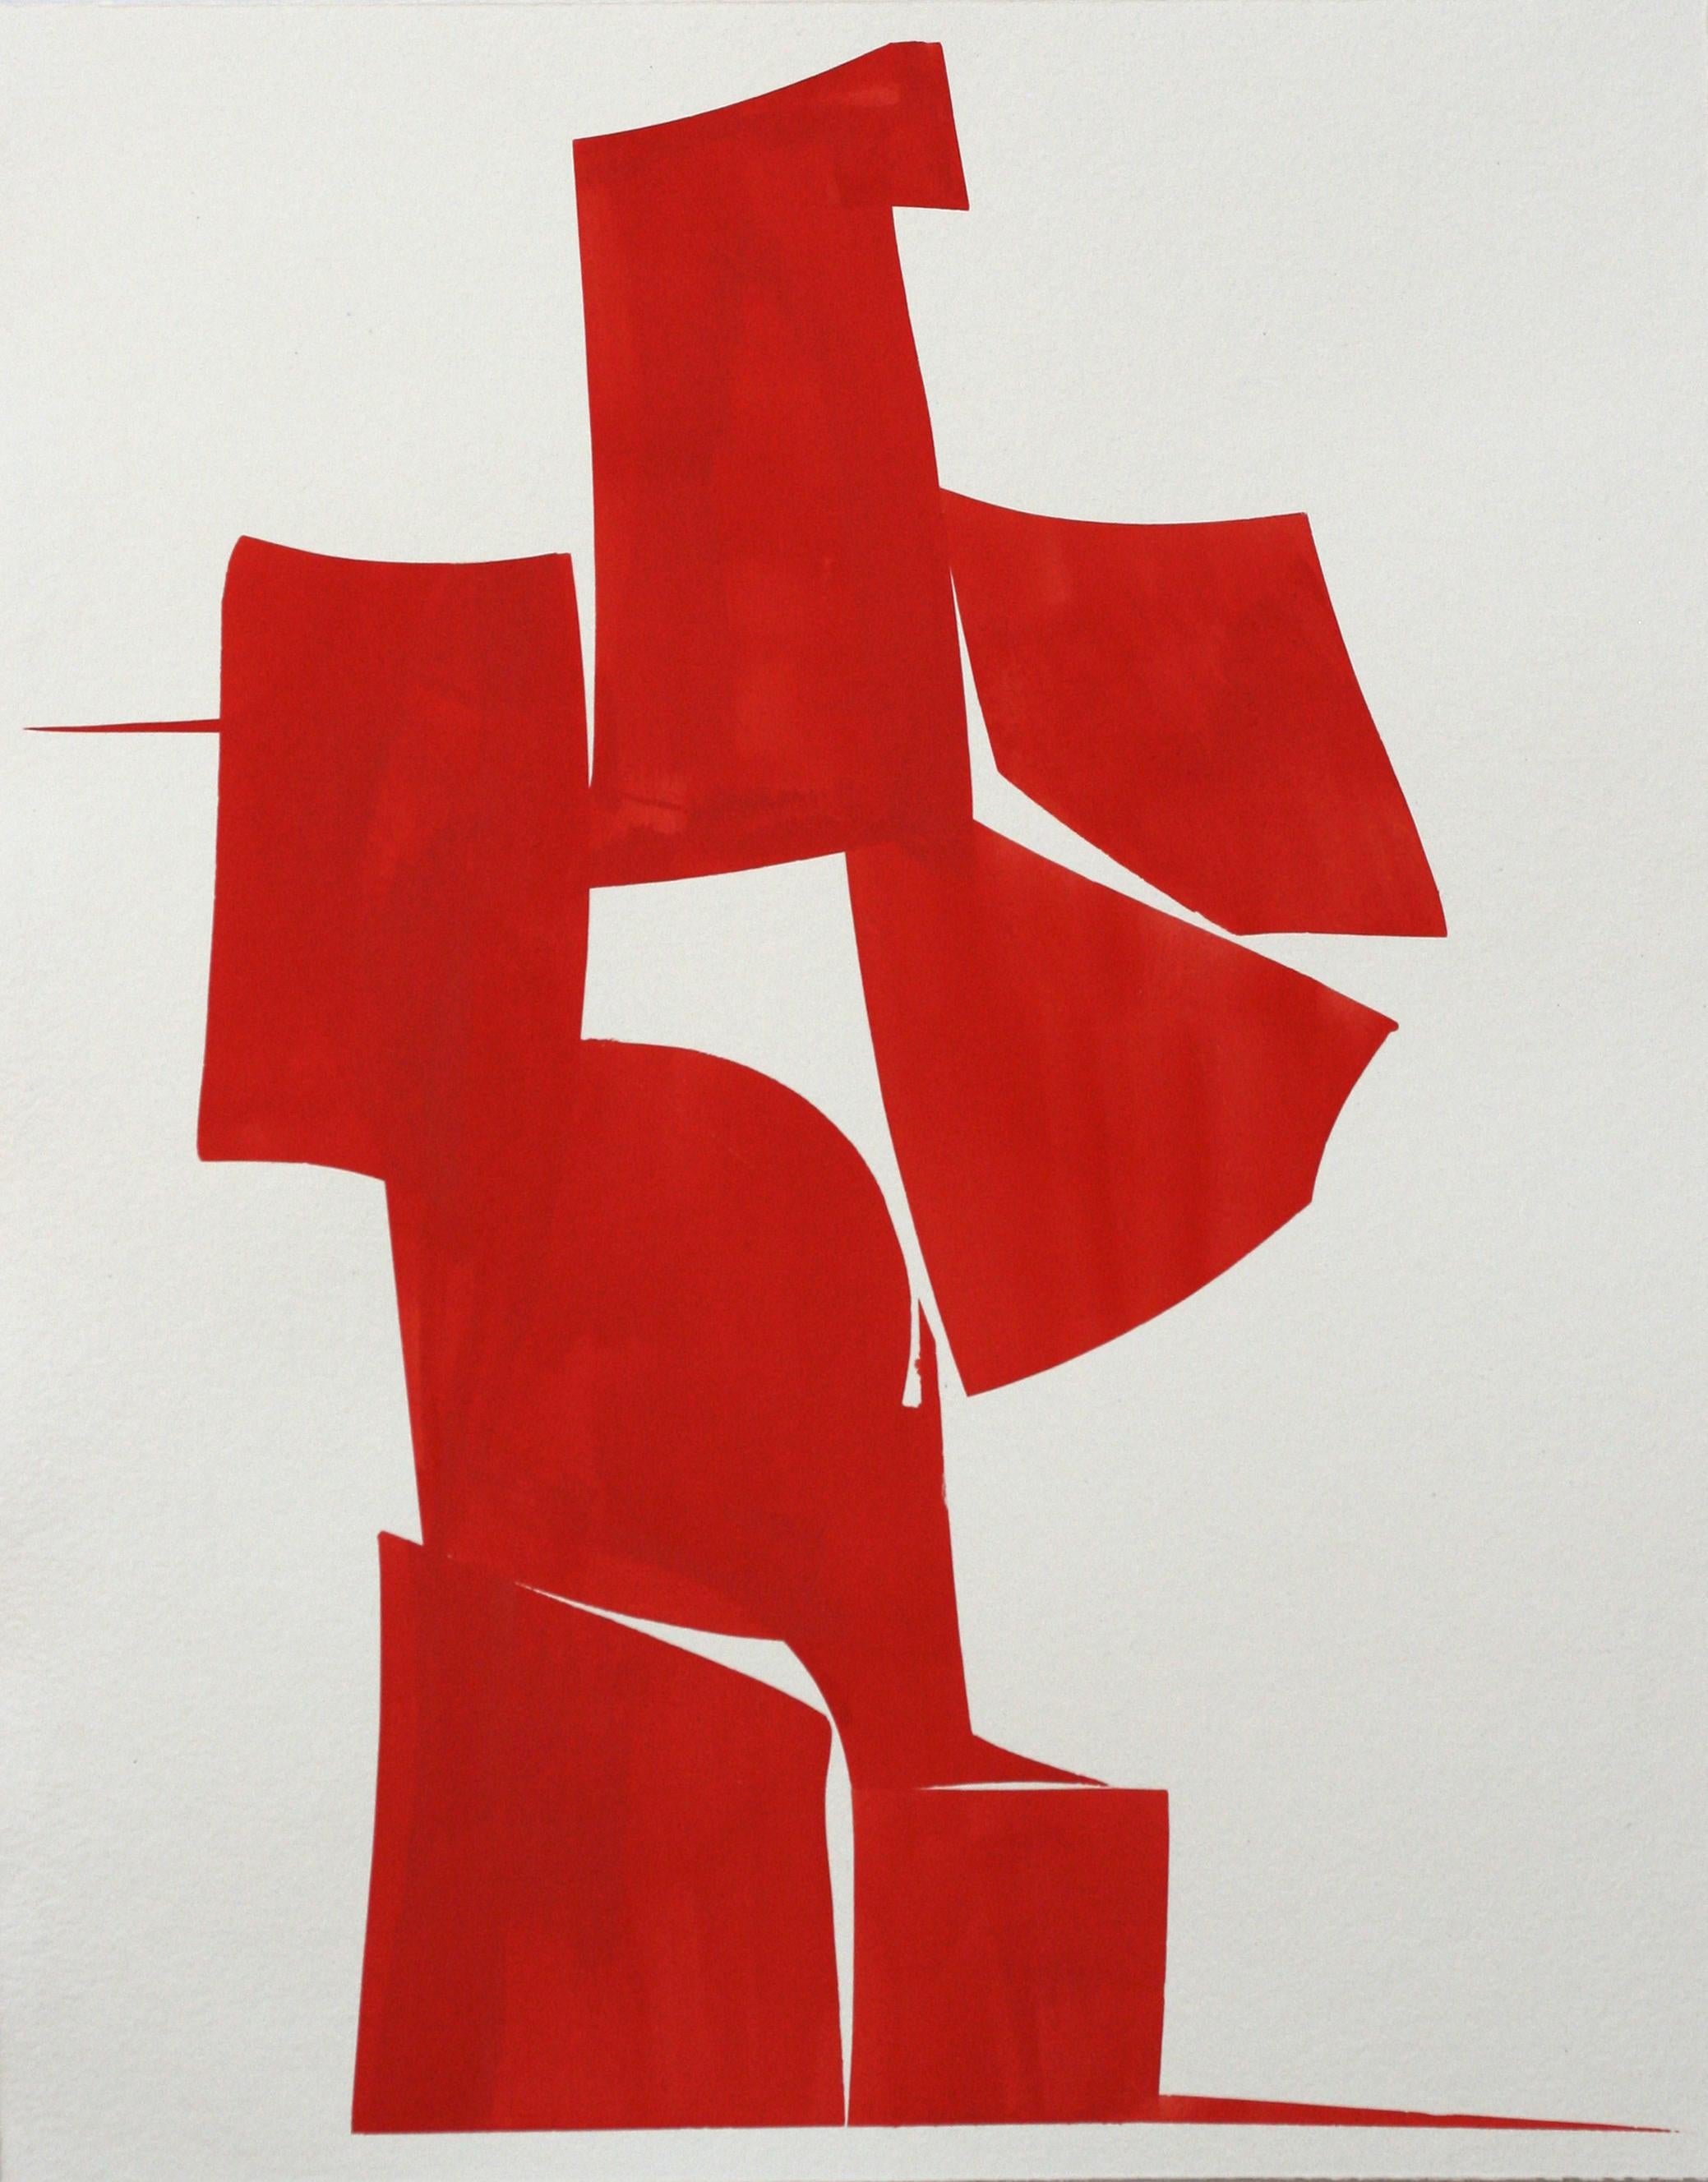 Joanne Freeman
Covers Red a, 2020
gouache on handmade paper
30 x 24 in.
(freem149)

This original gouache painting on handmade paper by Joanne Freeman features bold red abstracted shapes on a white background.

"My drawings and paintings utilize